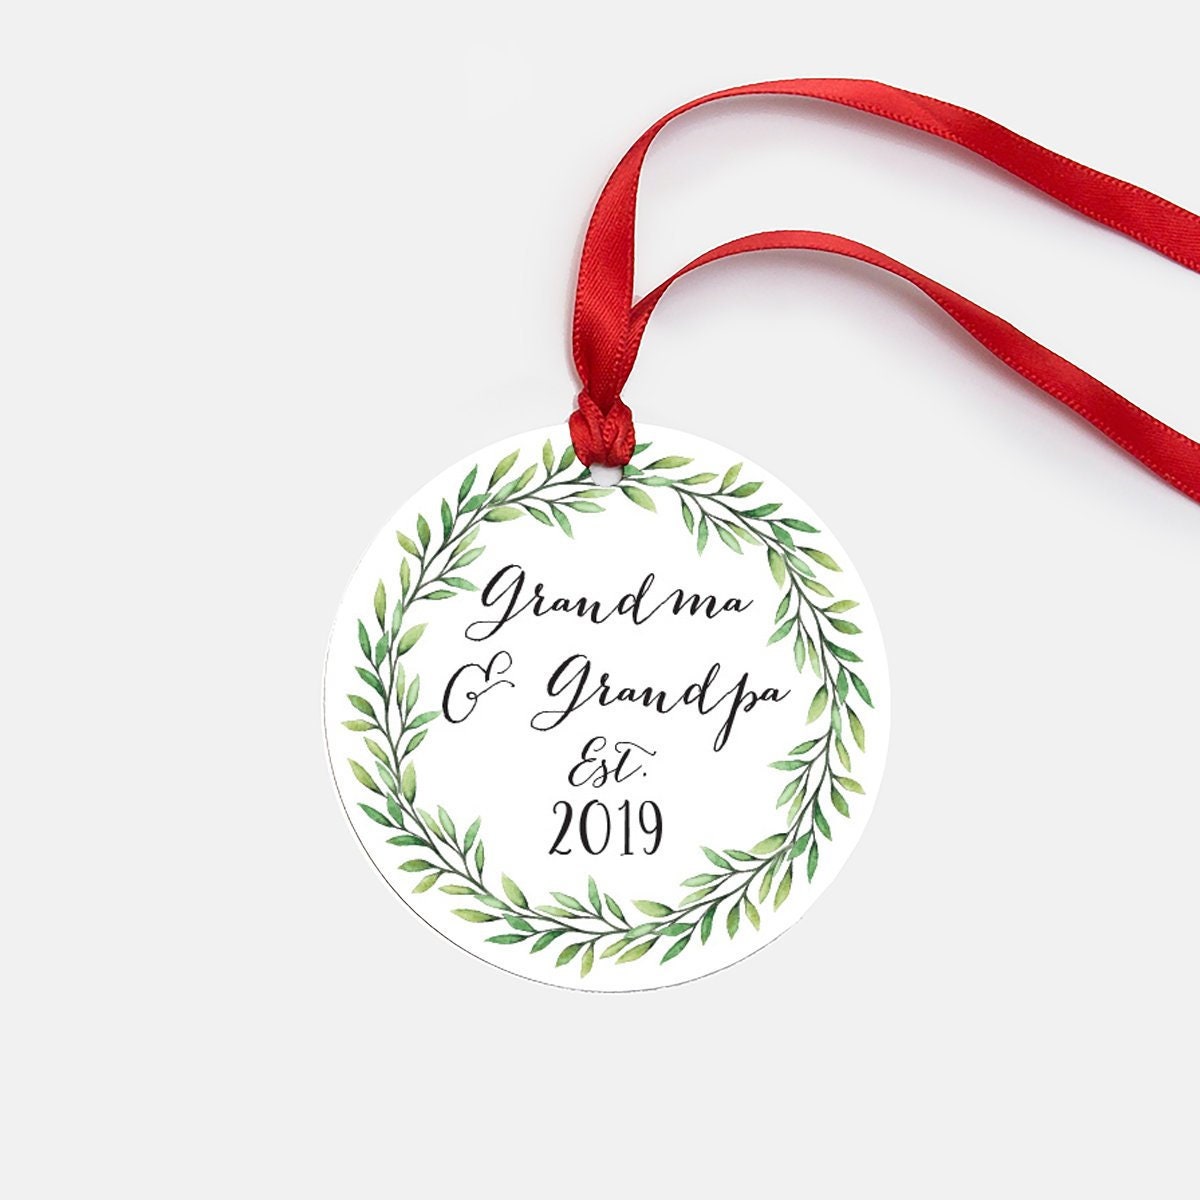 Pregnancy Announcement Christmas Ornament, Grandma & Grandpa Christmas Ornaments, Christmas Pregnancy Reveal, Baby Ornament